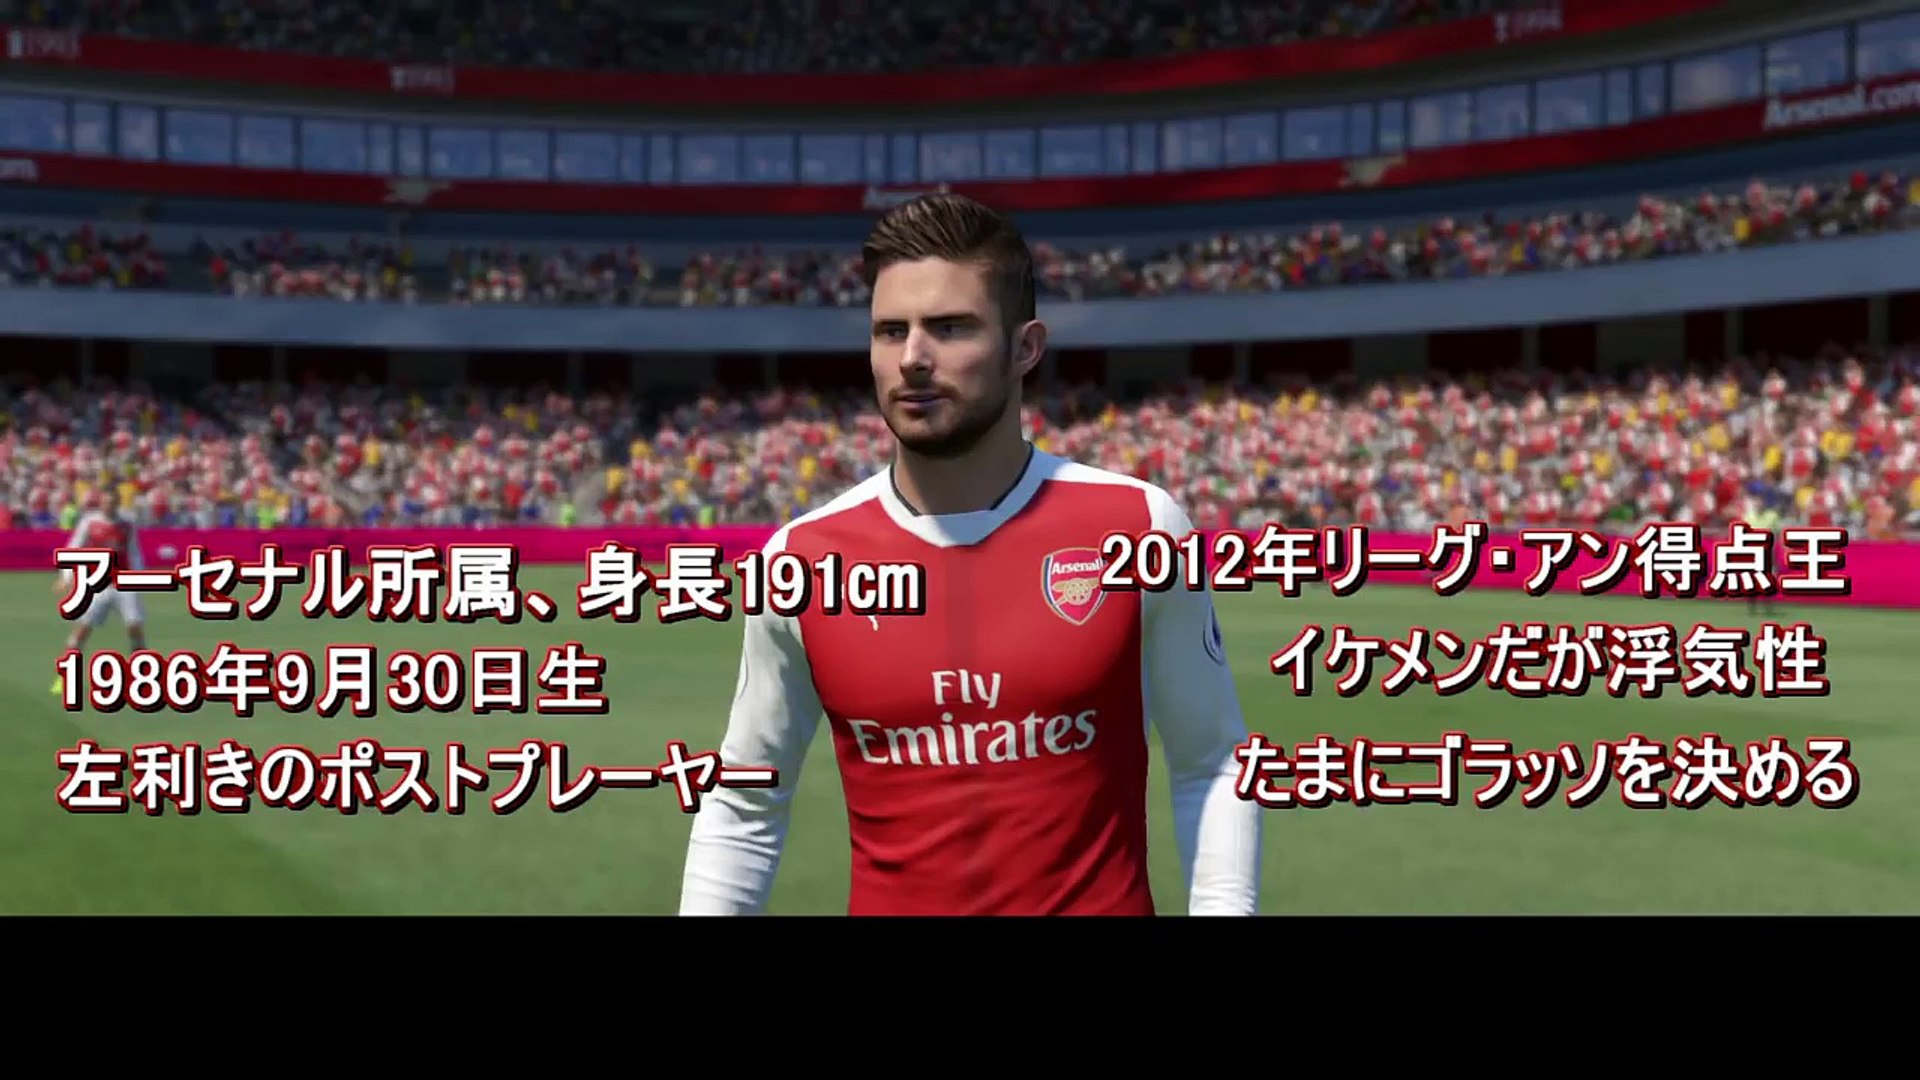 Fut17 オリヴィエ ジルーsp もっと評価されるべき男 How To Giroud Video Dailymotion